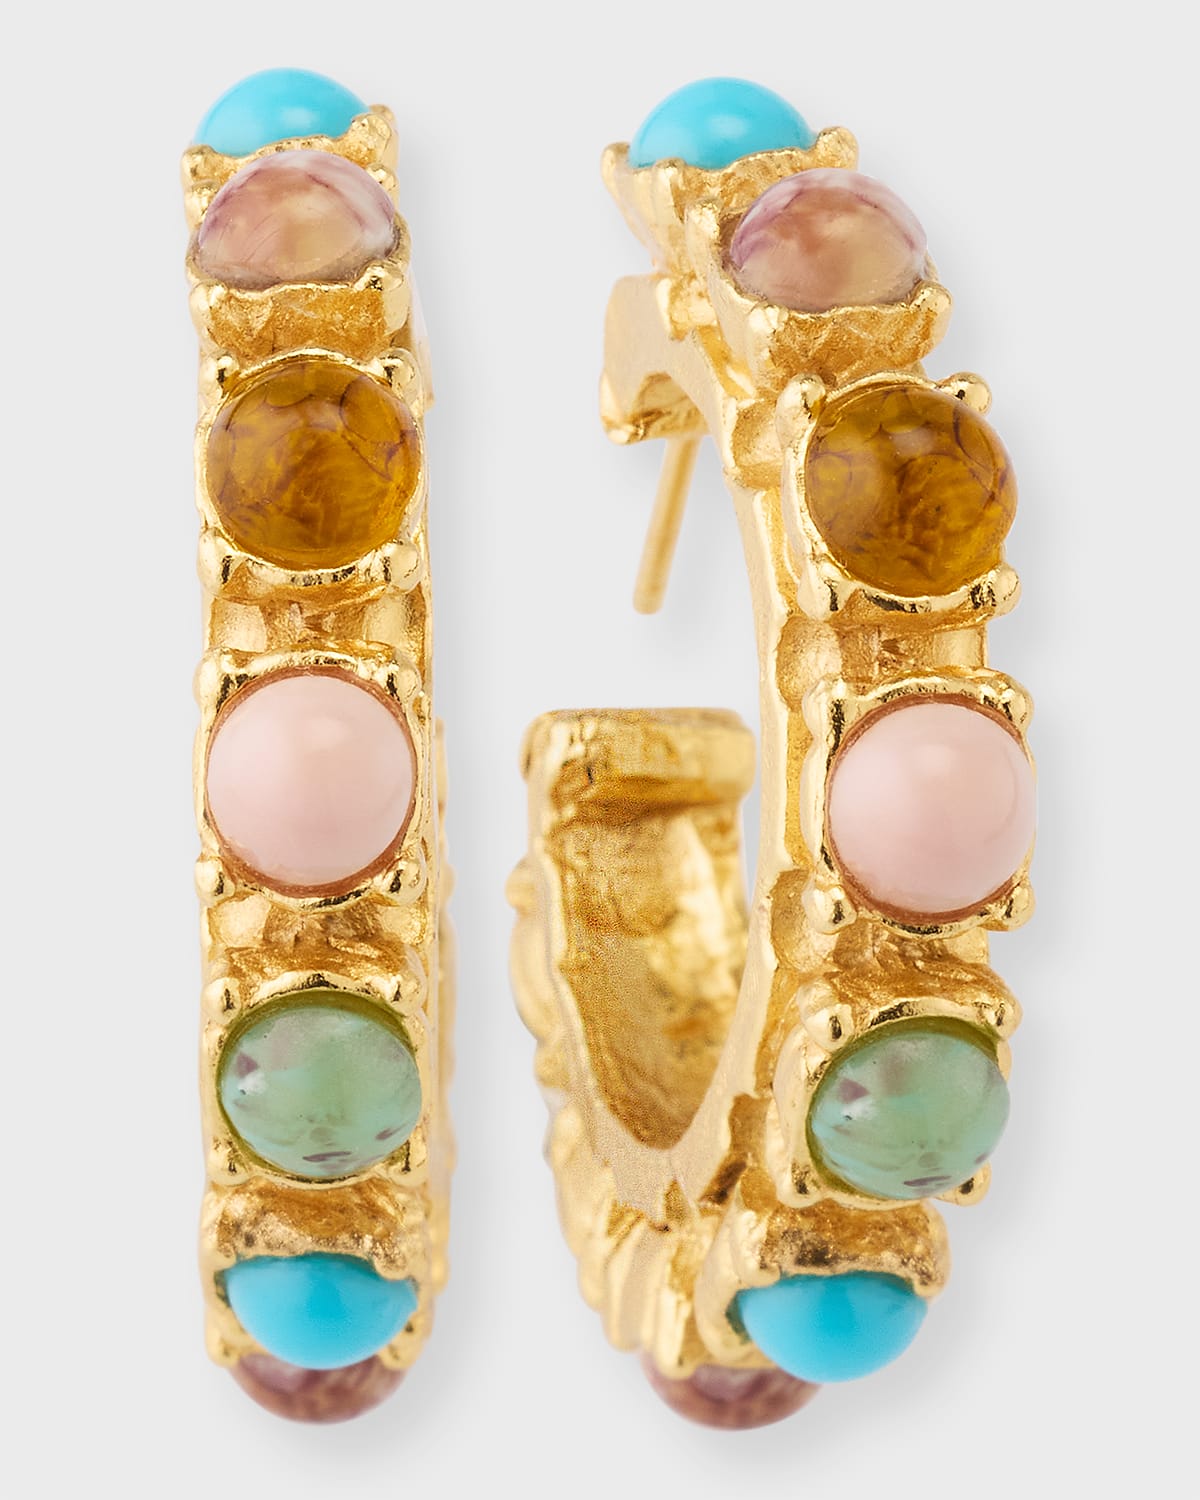 24k Gold-Plated Mixed Stone Hoop Earrings